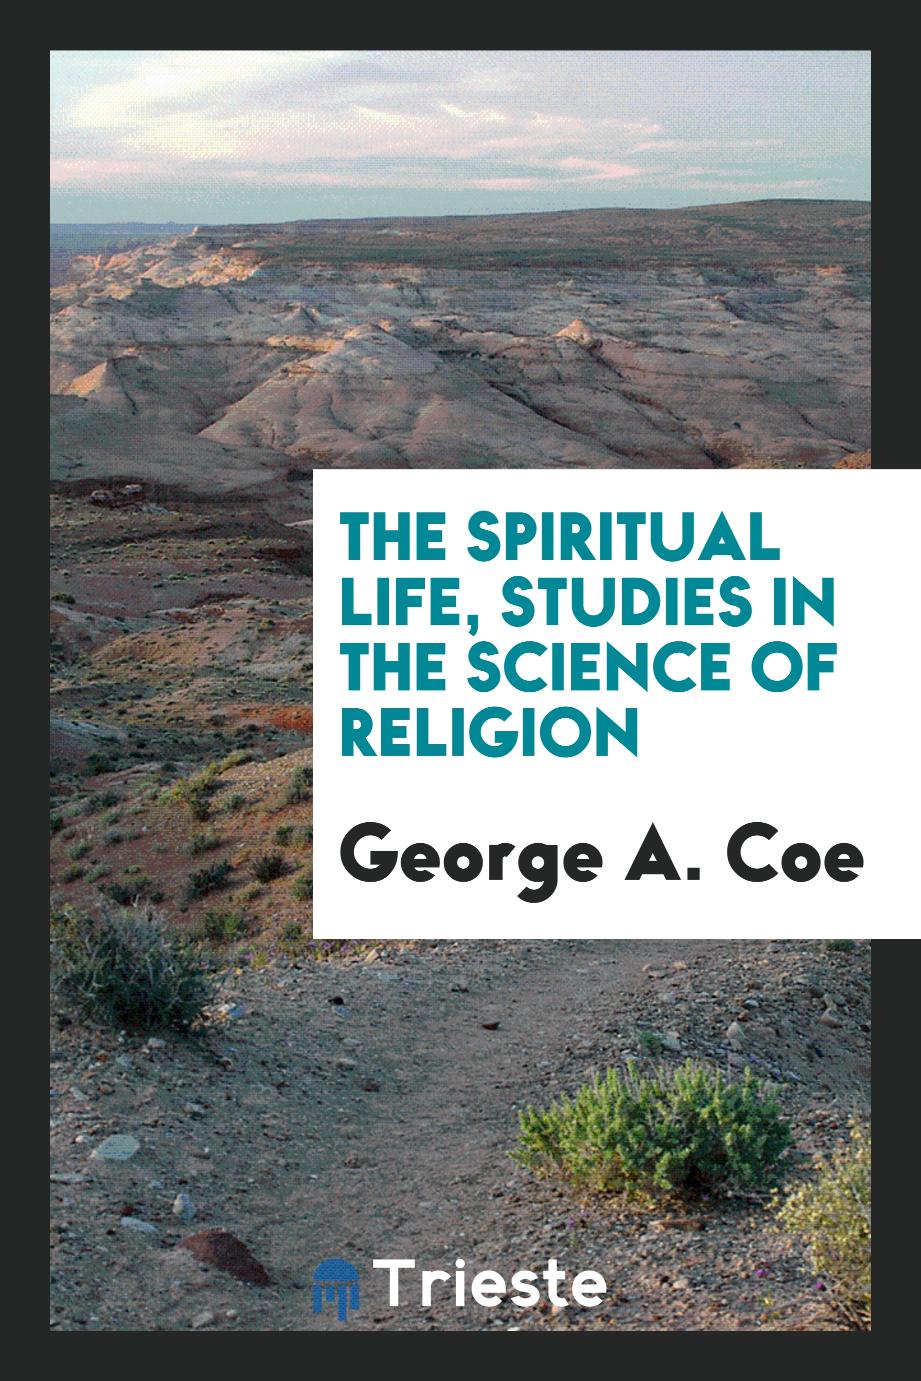 The spiritual life, studies in the science of religion